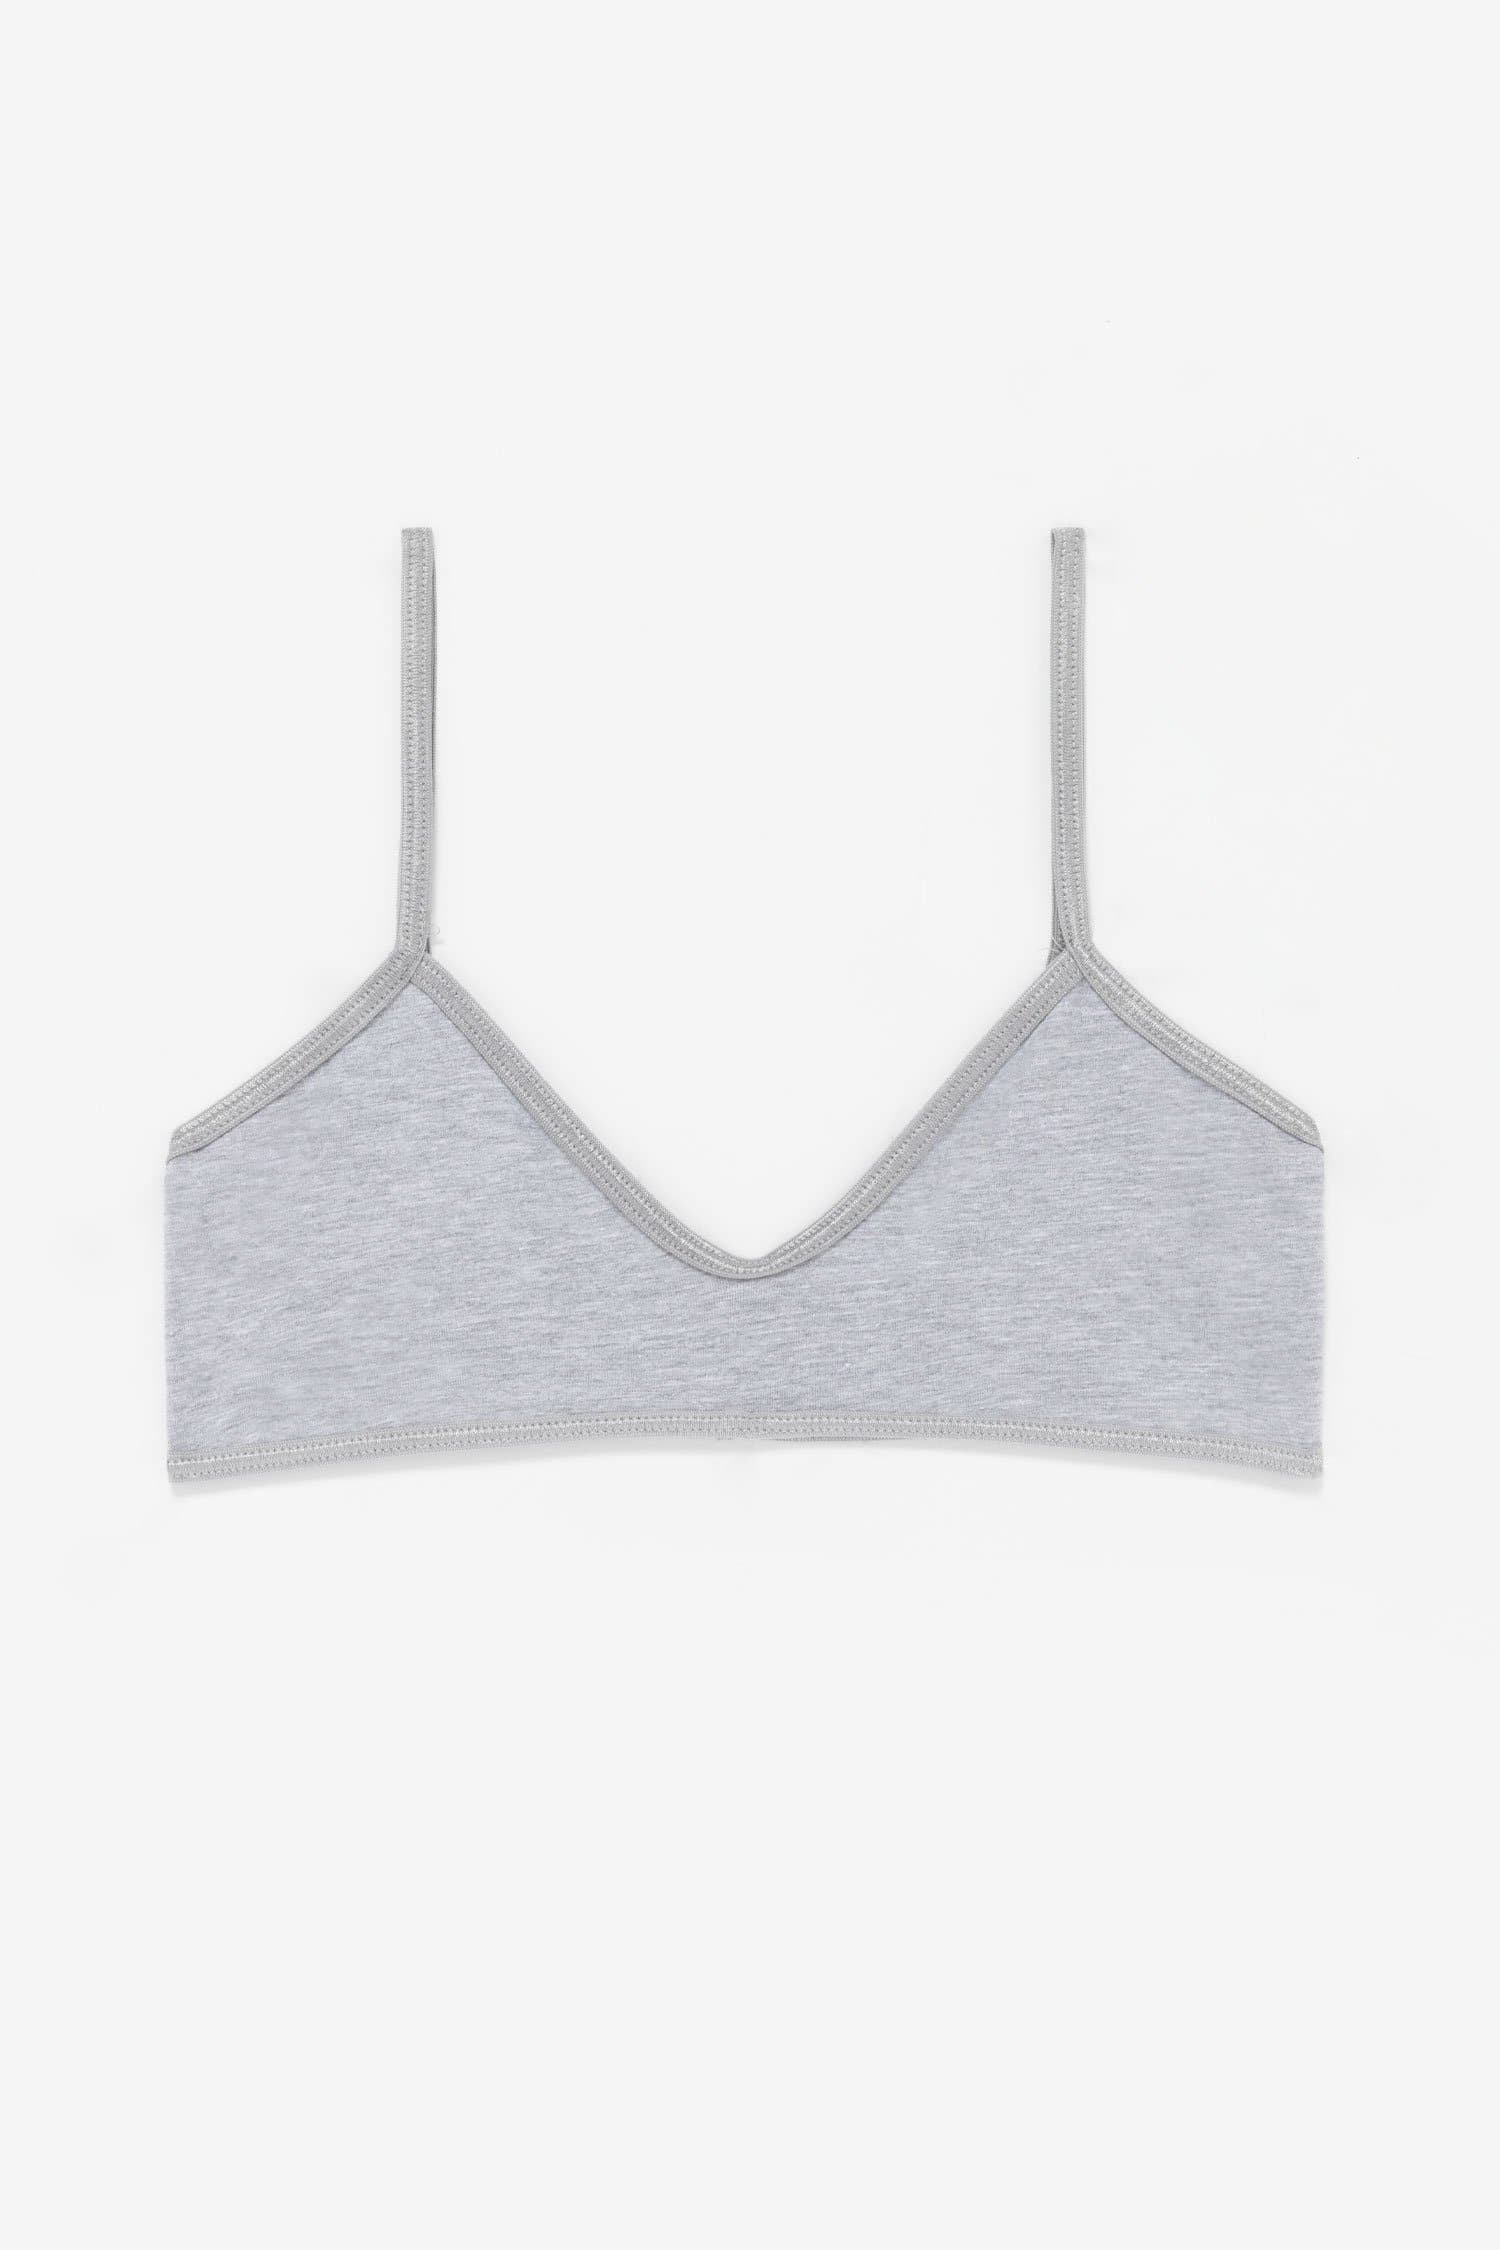 Cotton On Cotton:On seamless bralette co-ord in light grey - ShopStyle Bras